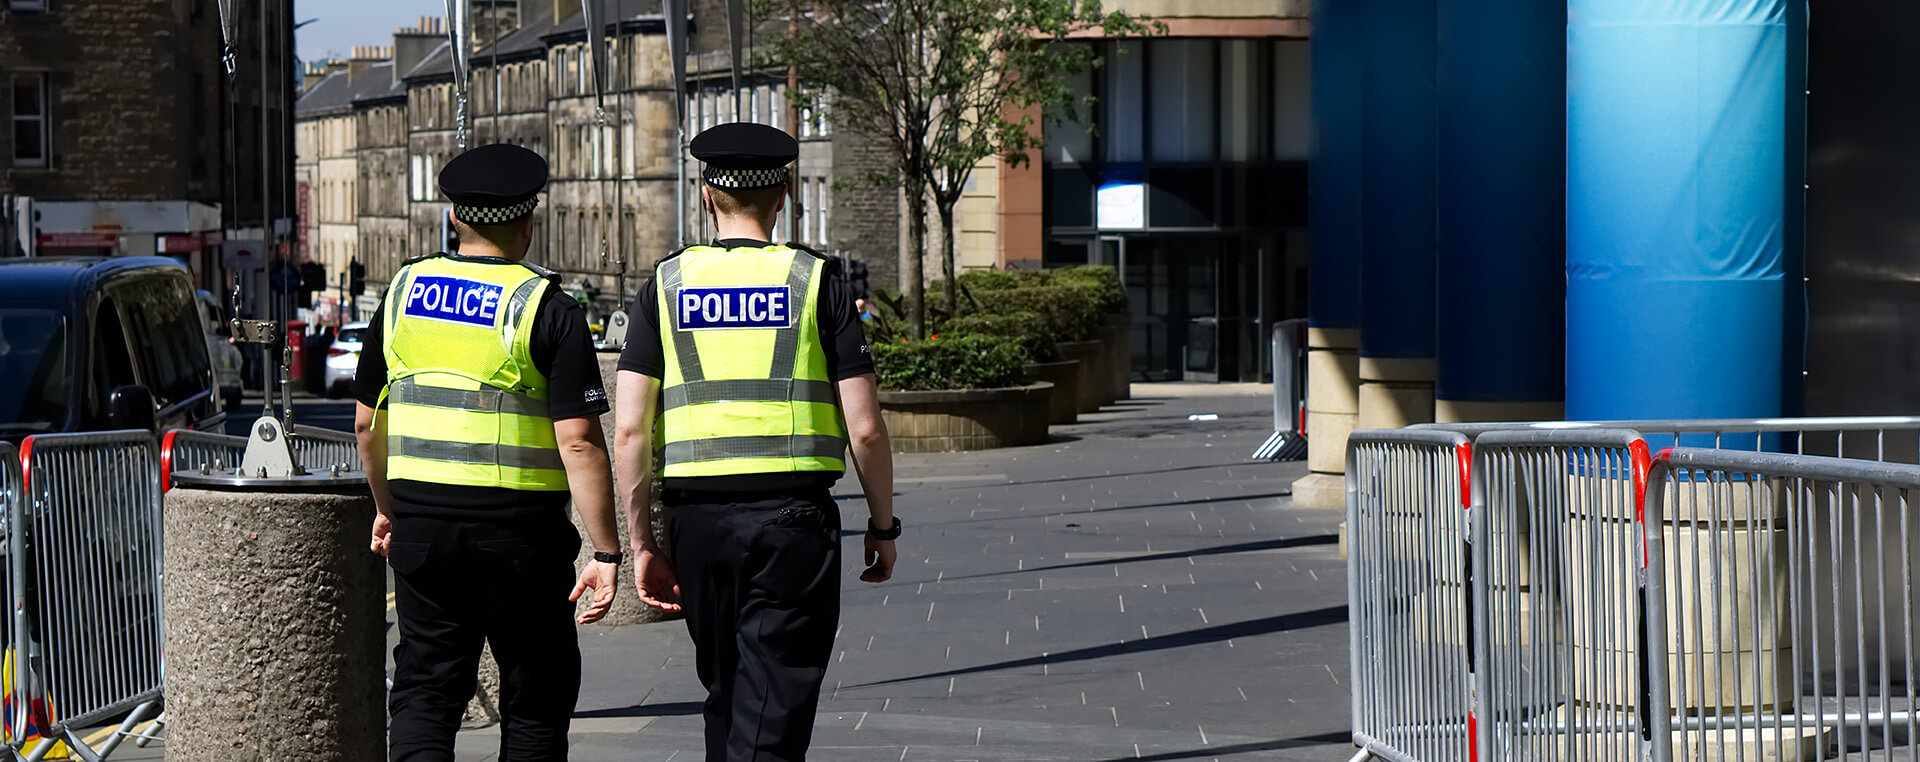 Two police officers patrolling together in a city centre street.